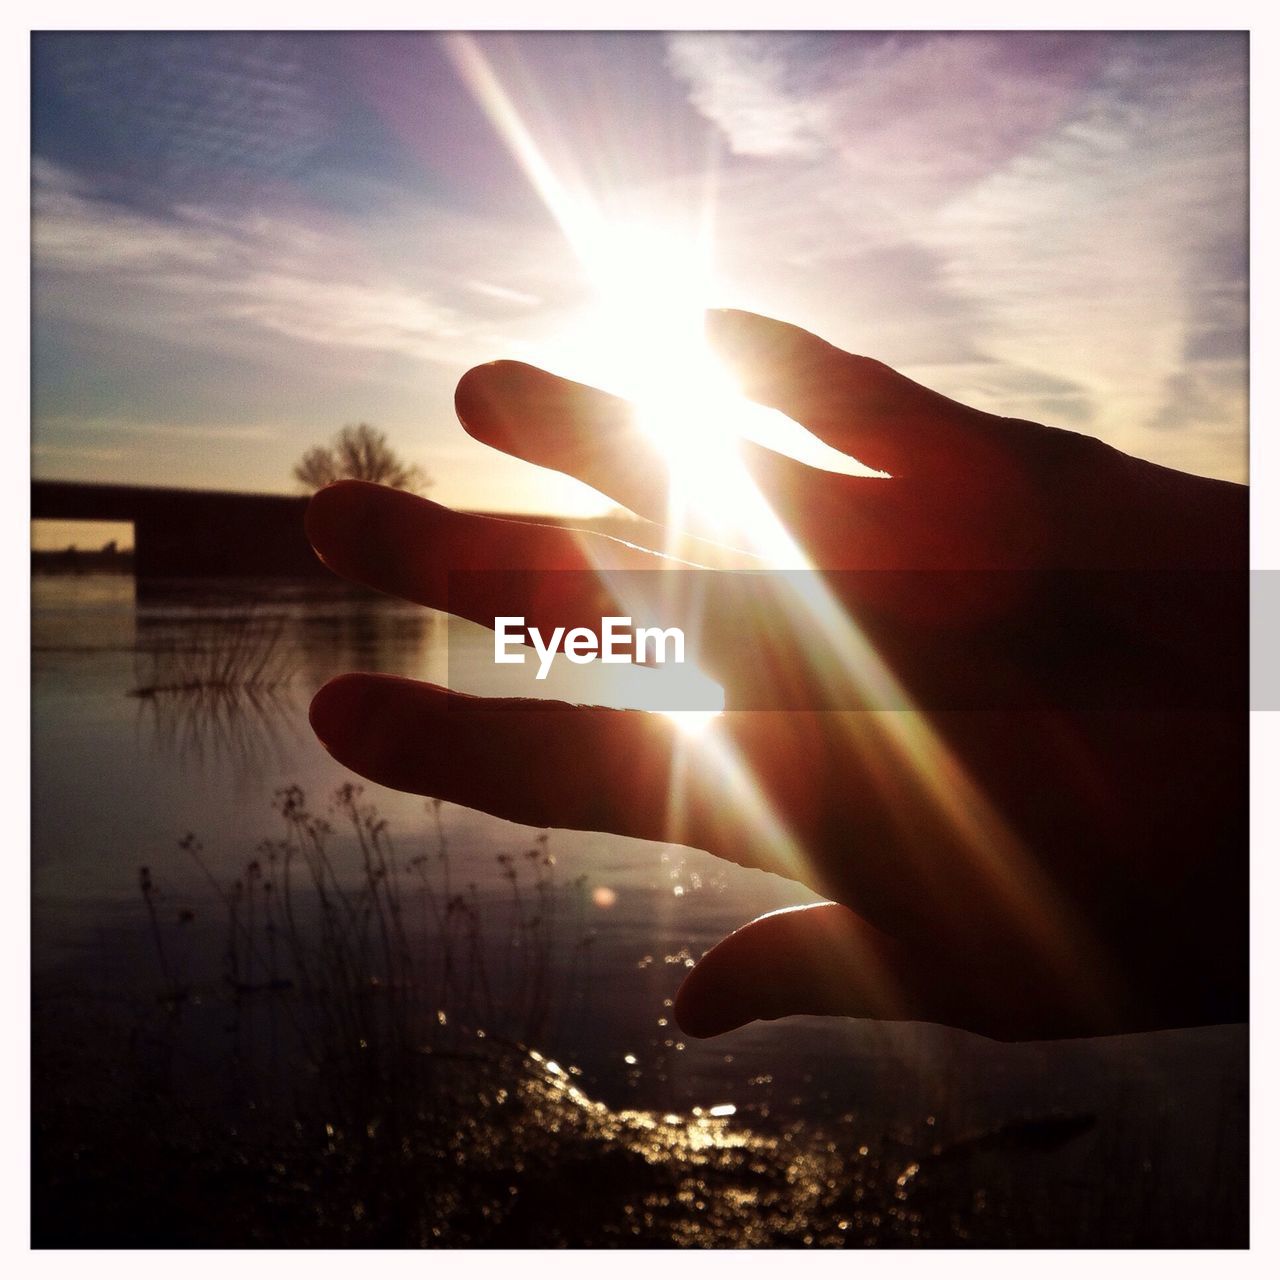 Cropped image of hand against lake during sunset